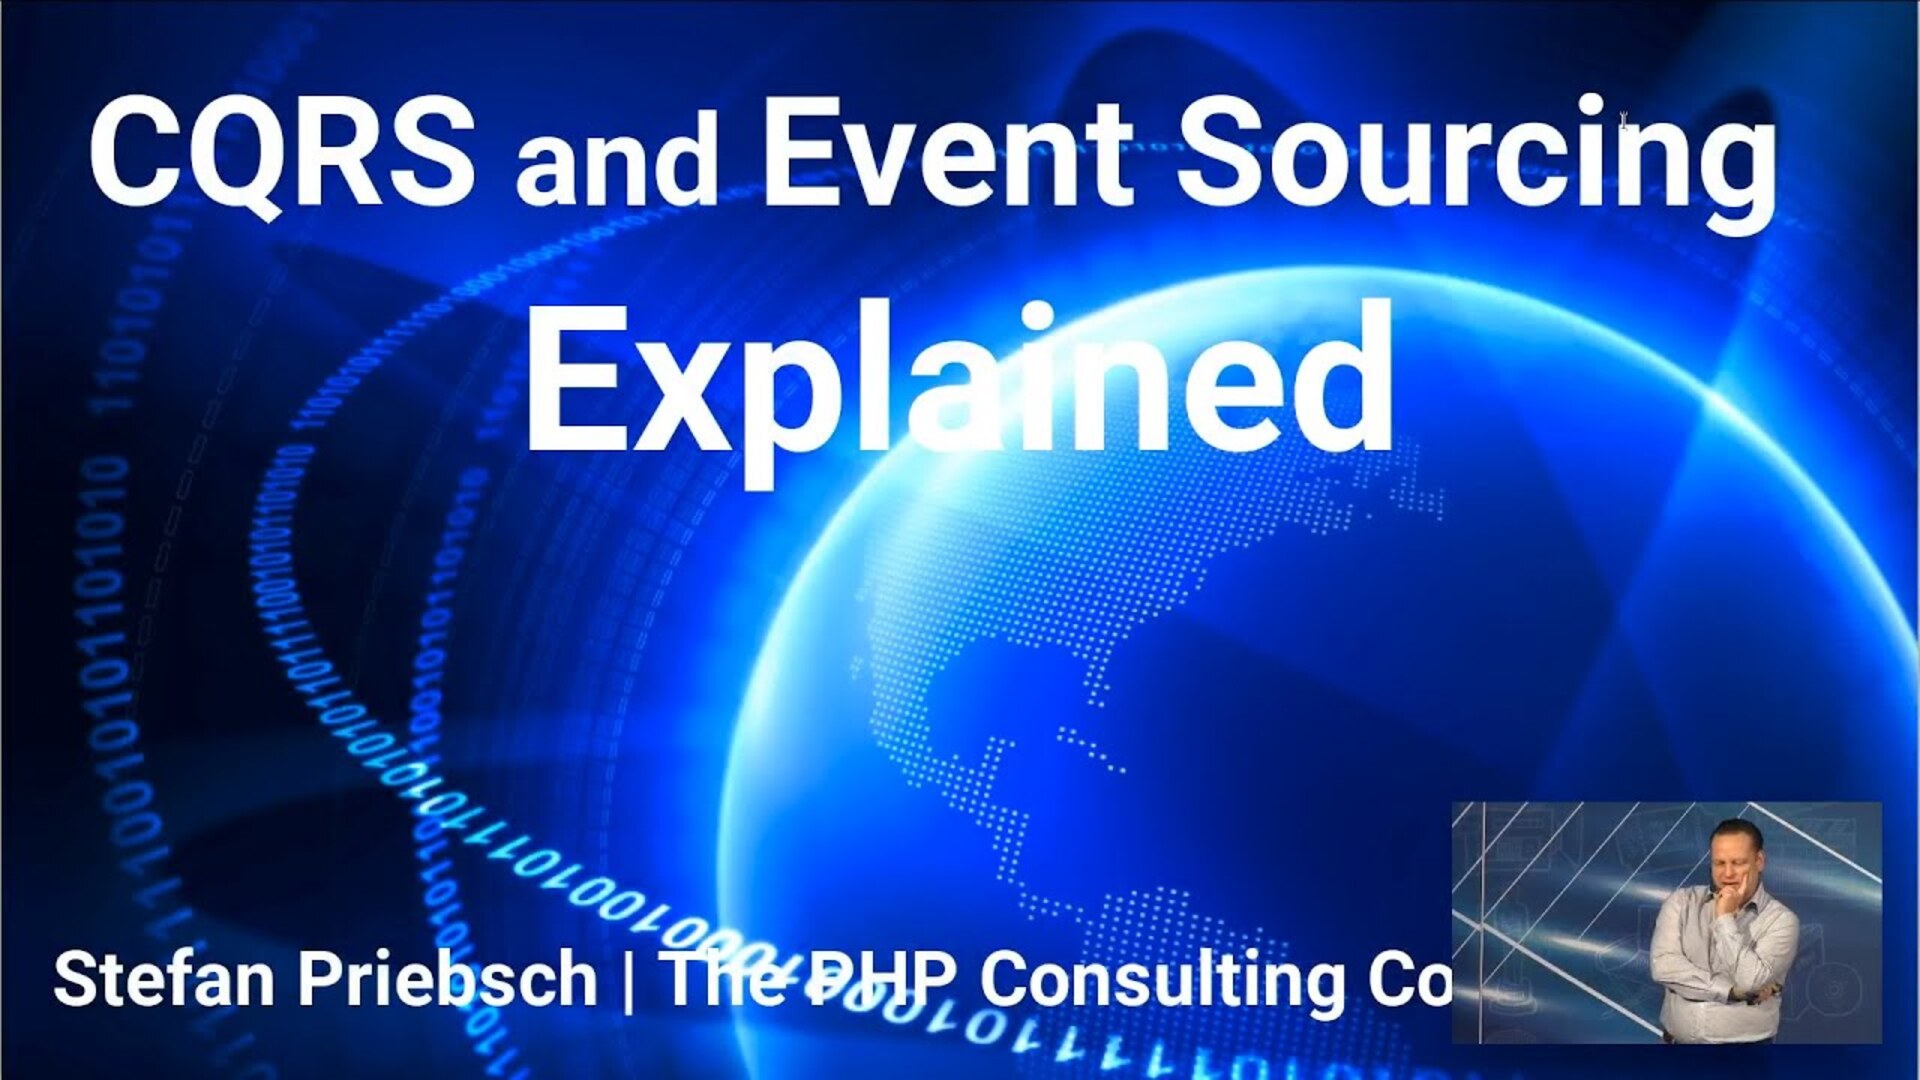 CQRS and Event Sourcing Explained